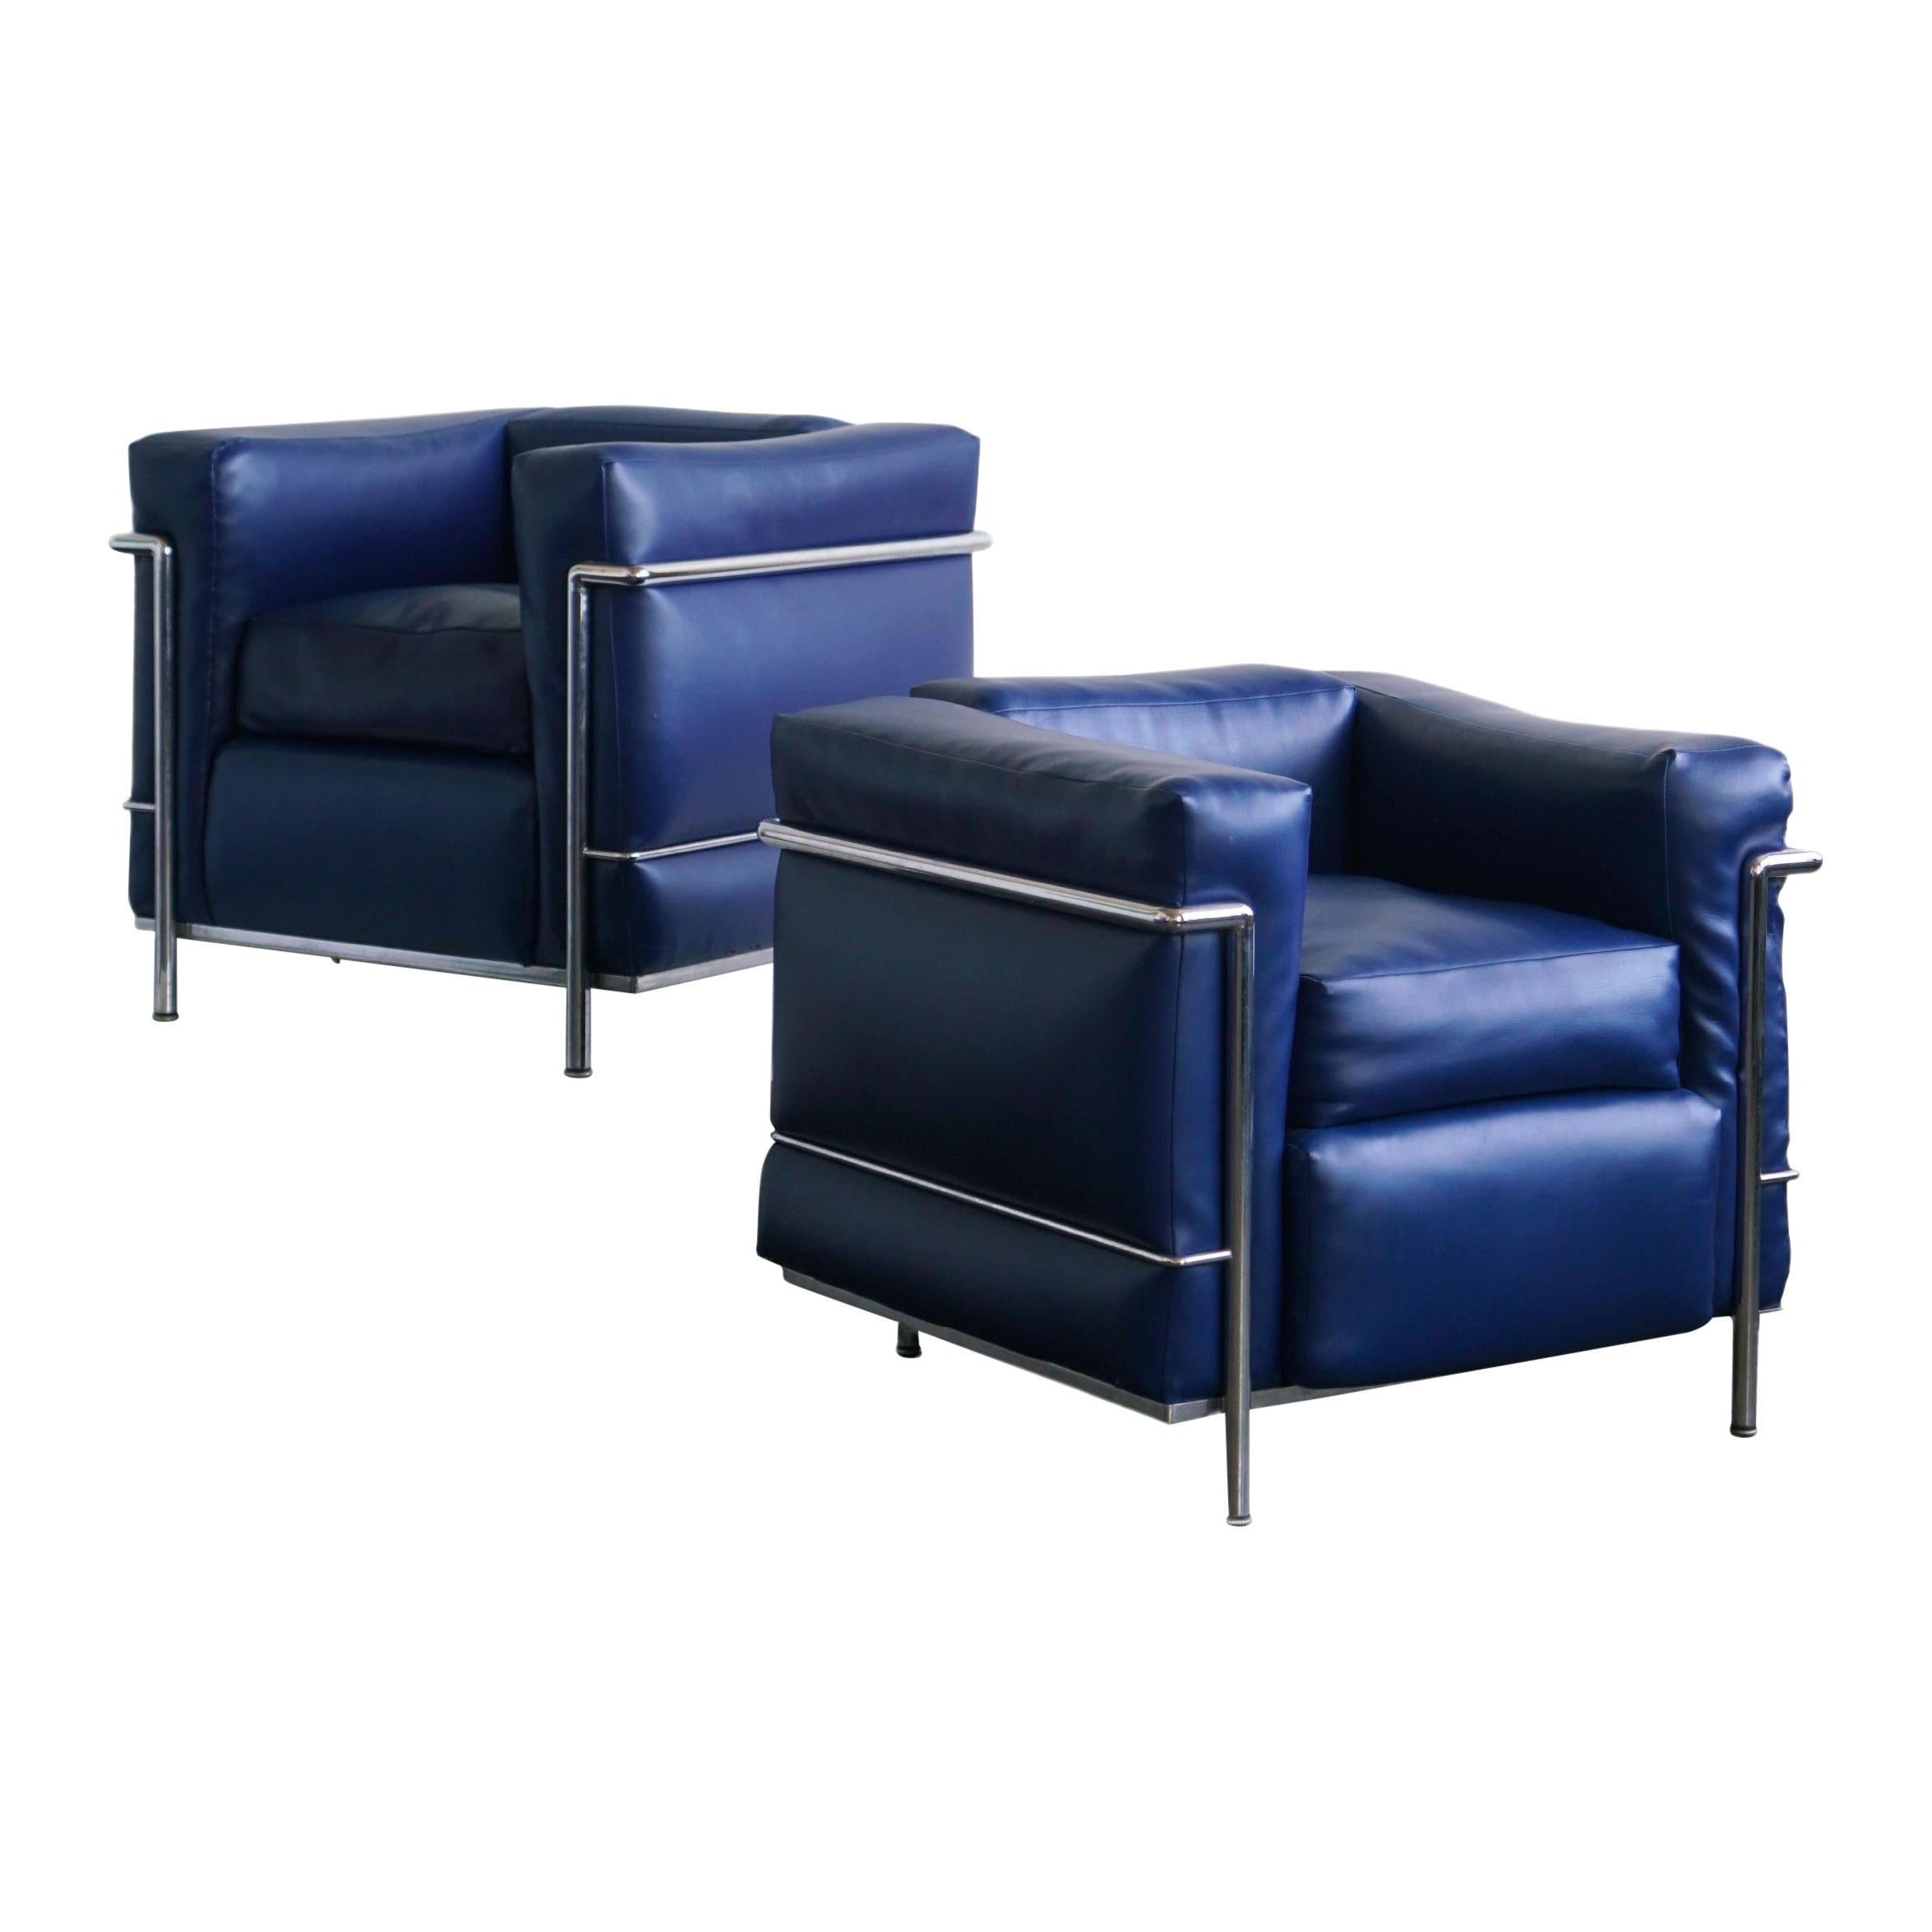 Pair of Blue Le Corbusier Lc2 Lounge Chairs for Cassina, 1960's, Qty Two